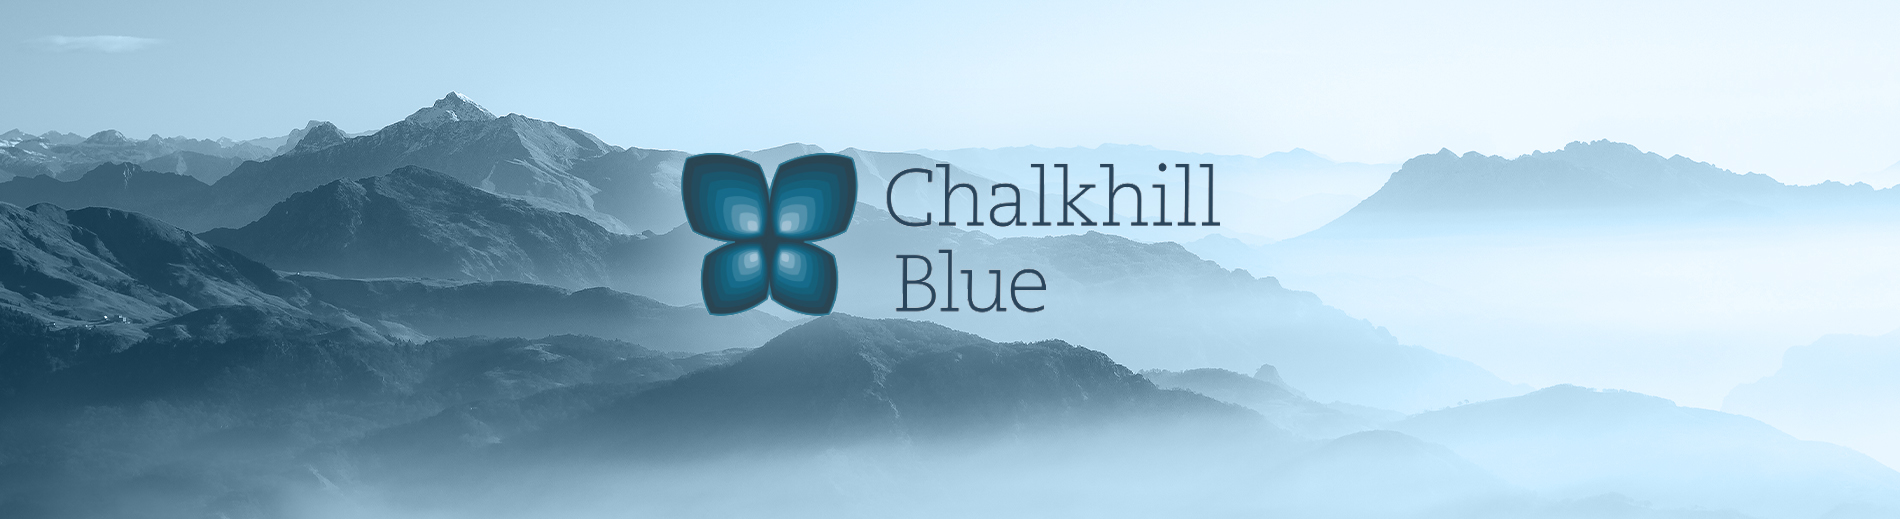 Chalkhill Blue Case Study title image for website design project